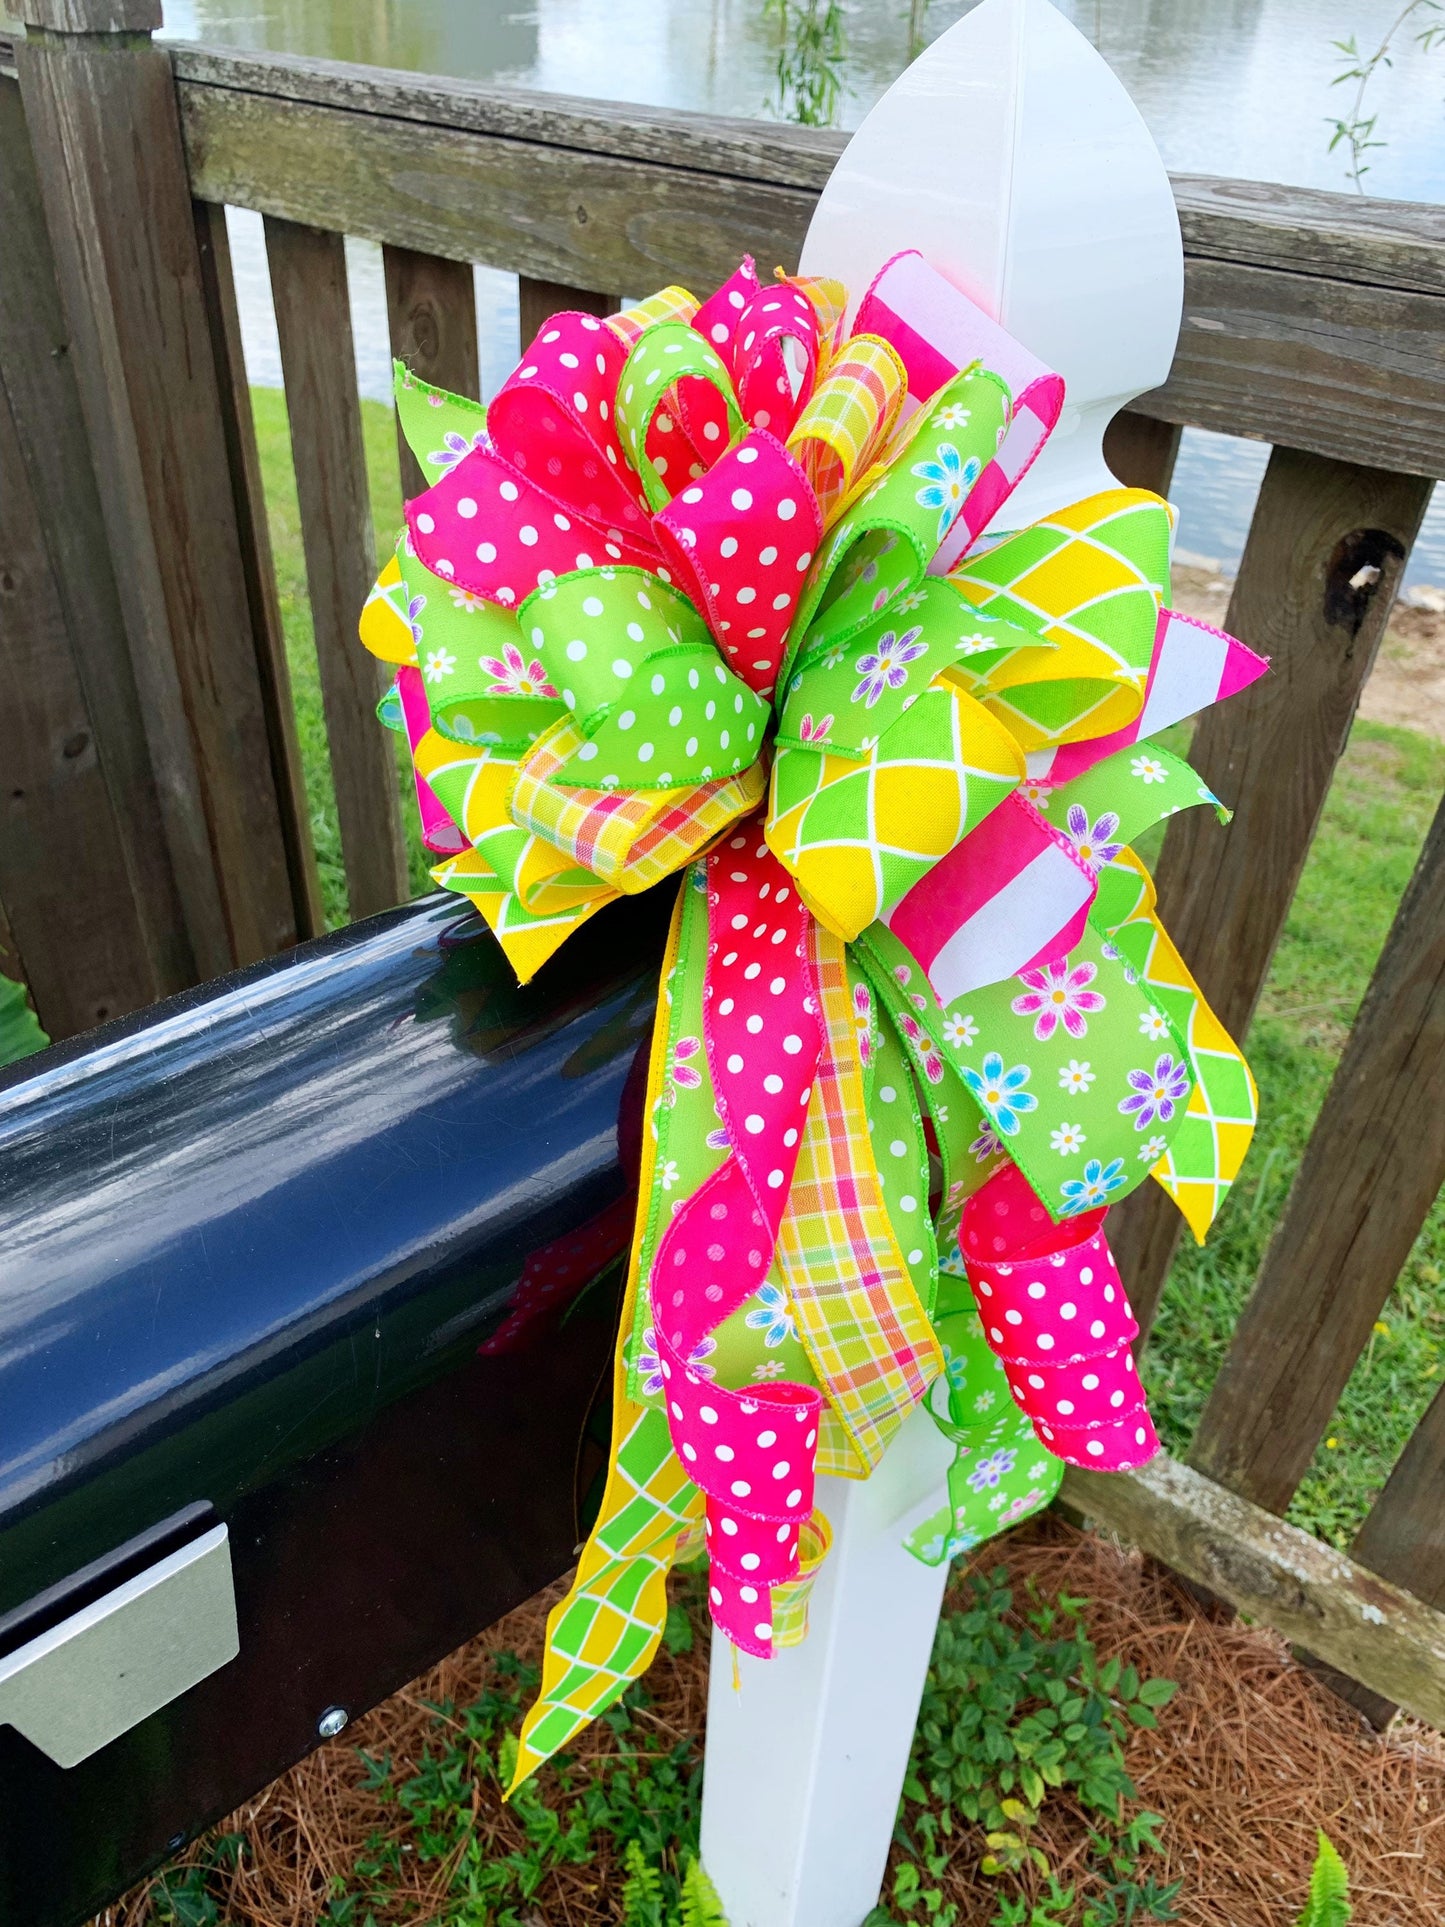 Everyday Collection - Flowers,Flower Ribbon, Floral Bow,Wreath Bow,Mailbox Bow,Gift, Gifts,Ribbon,Summer Bow,Polka Dots,Polka Dot Ribbon